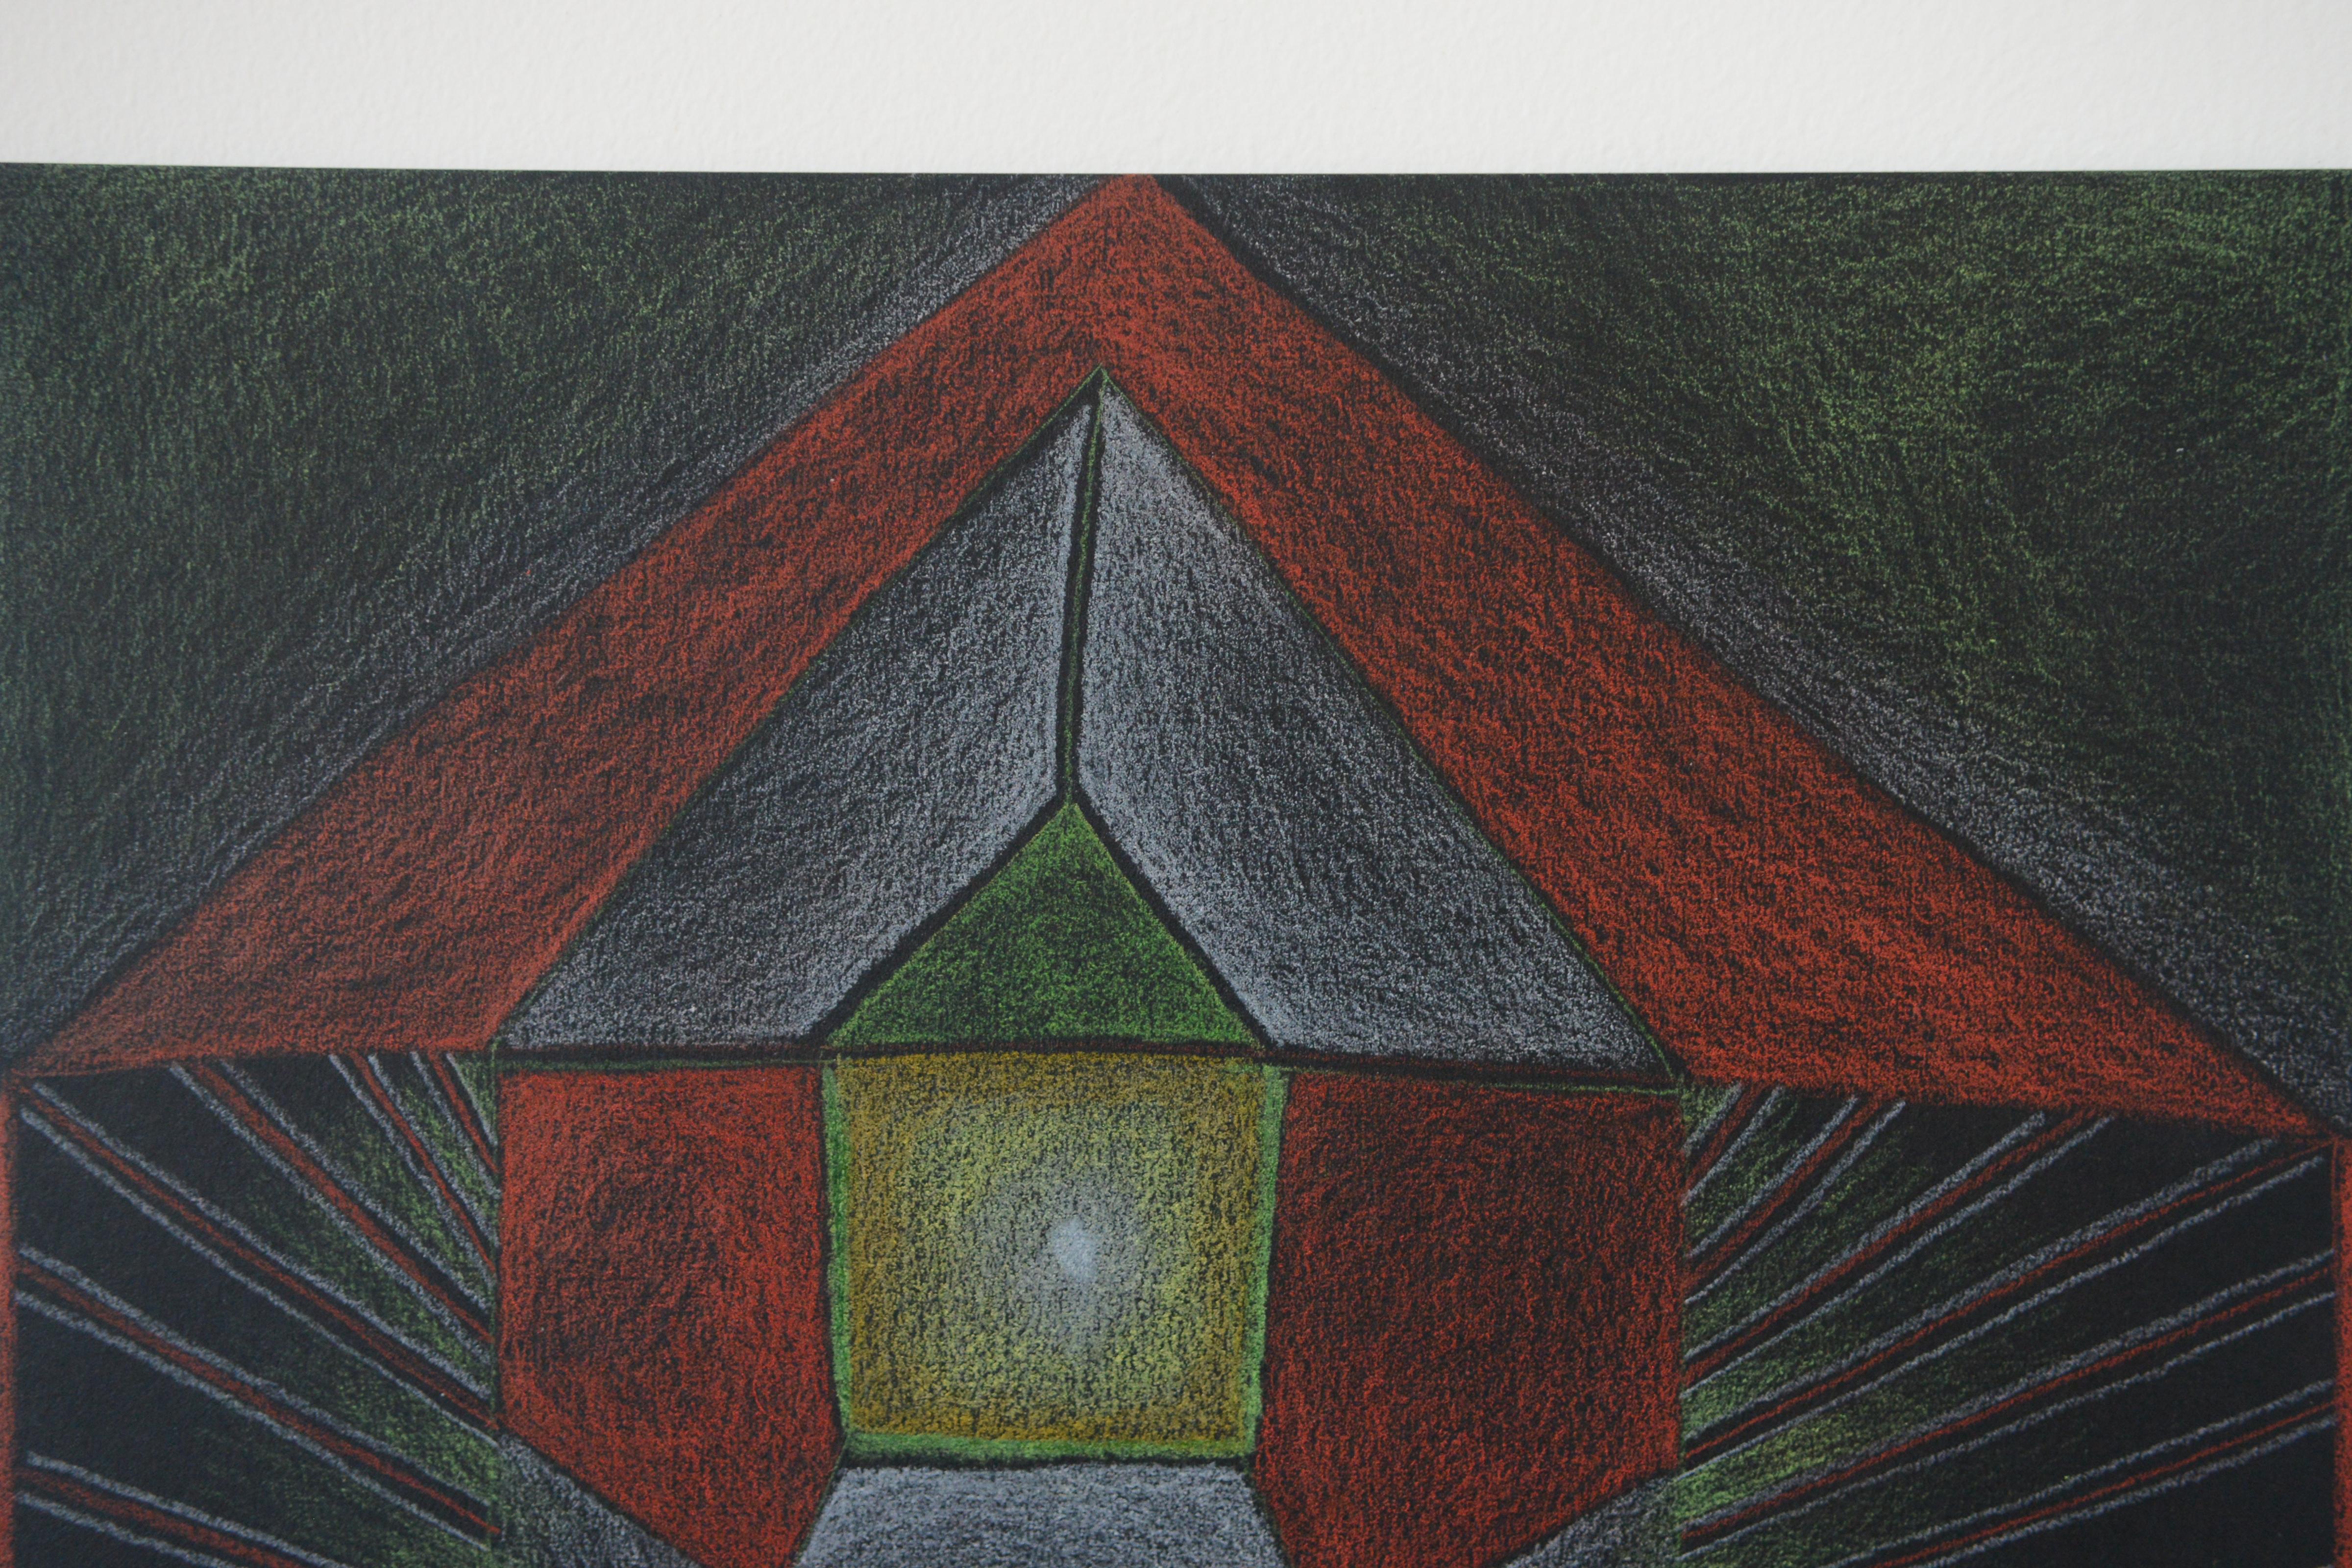 Opening Houses on Black 2, 2022. Coloured pencil on black paper, 20 x 20cm

Nicky Marais (b. 1962) is a Namibian artist, educator and activist. Marais is well-known for her abstract artworks created using a personal vocabulary of abstract forms and